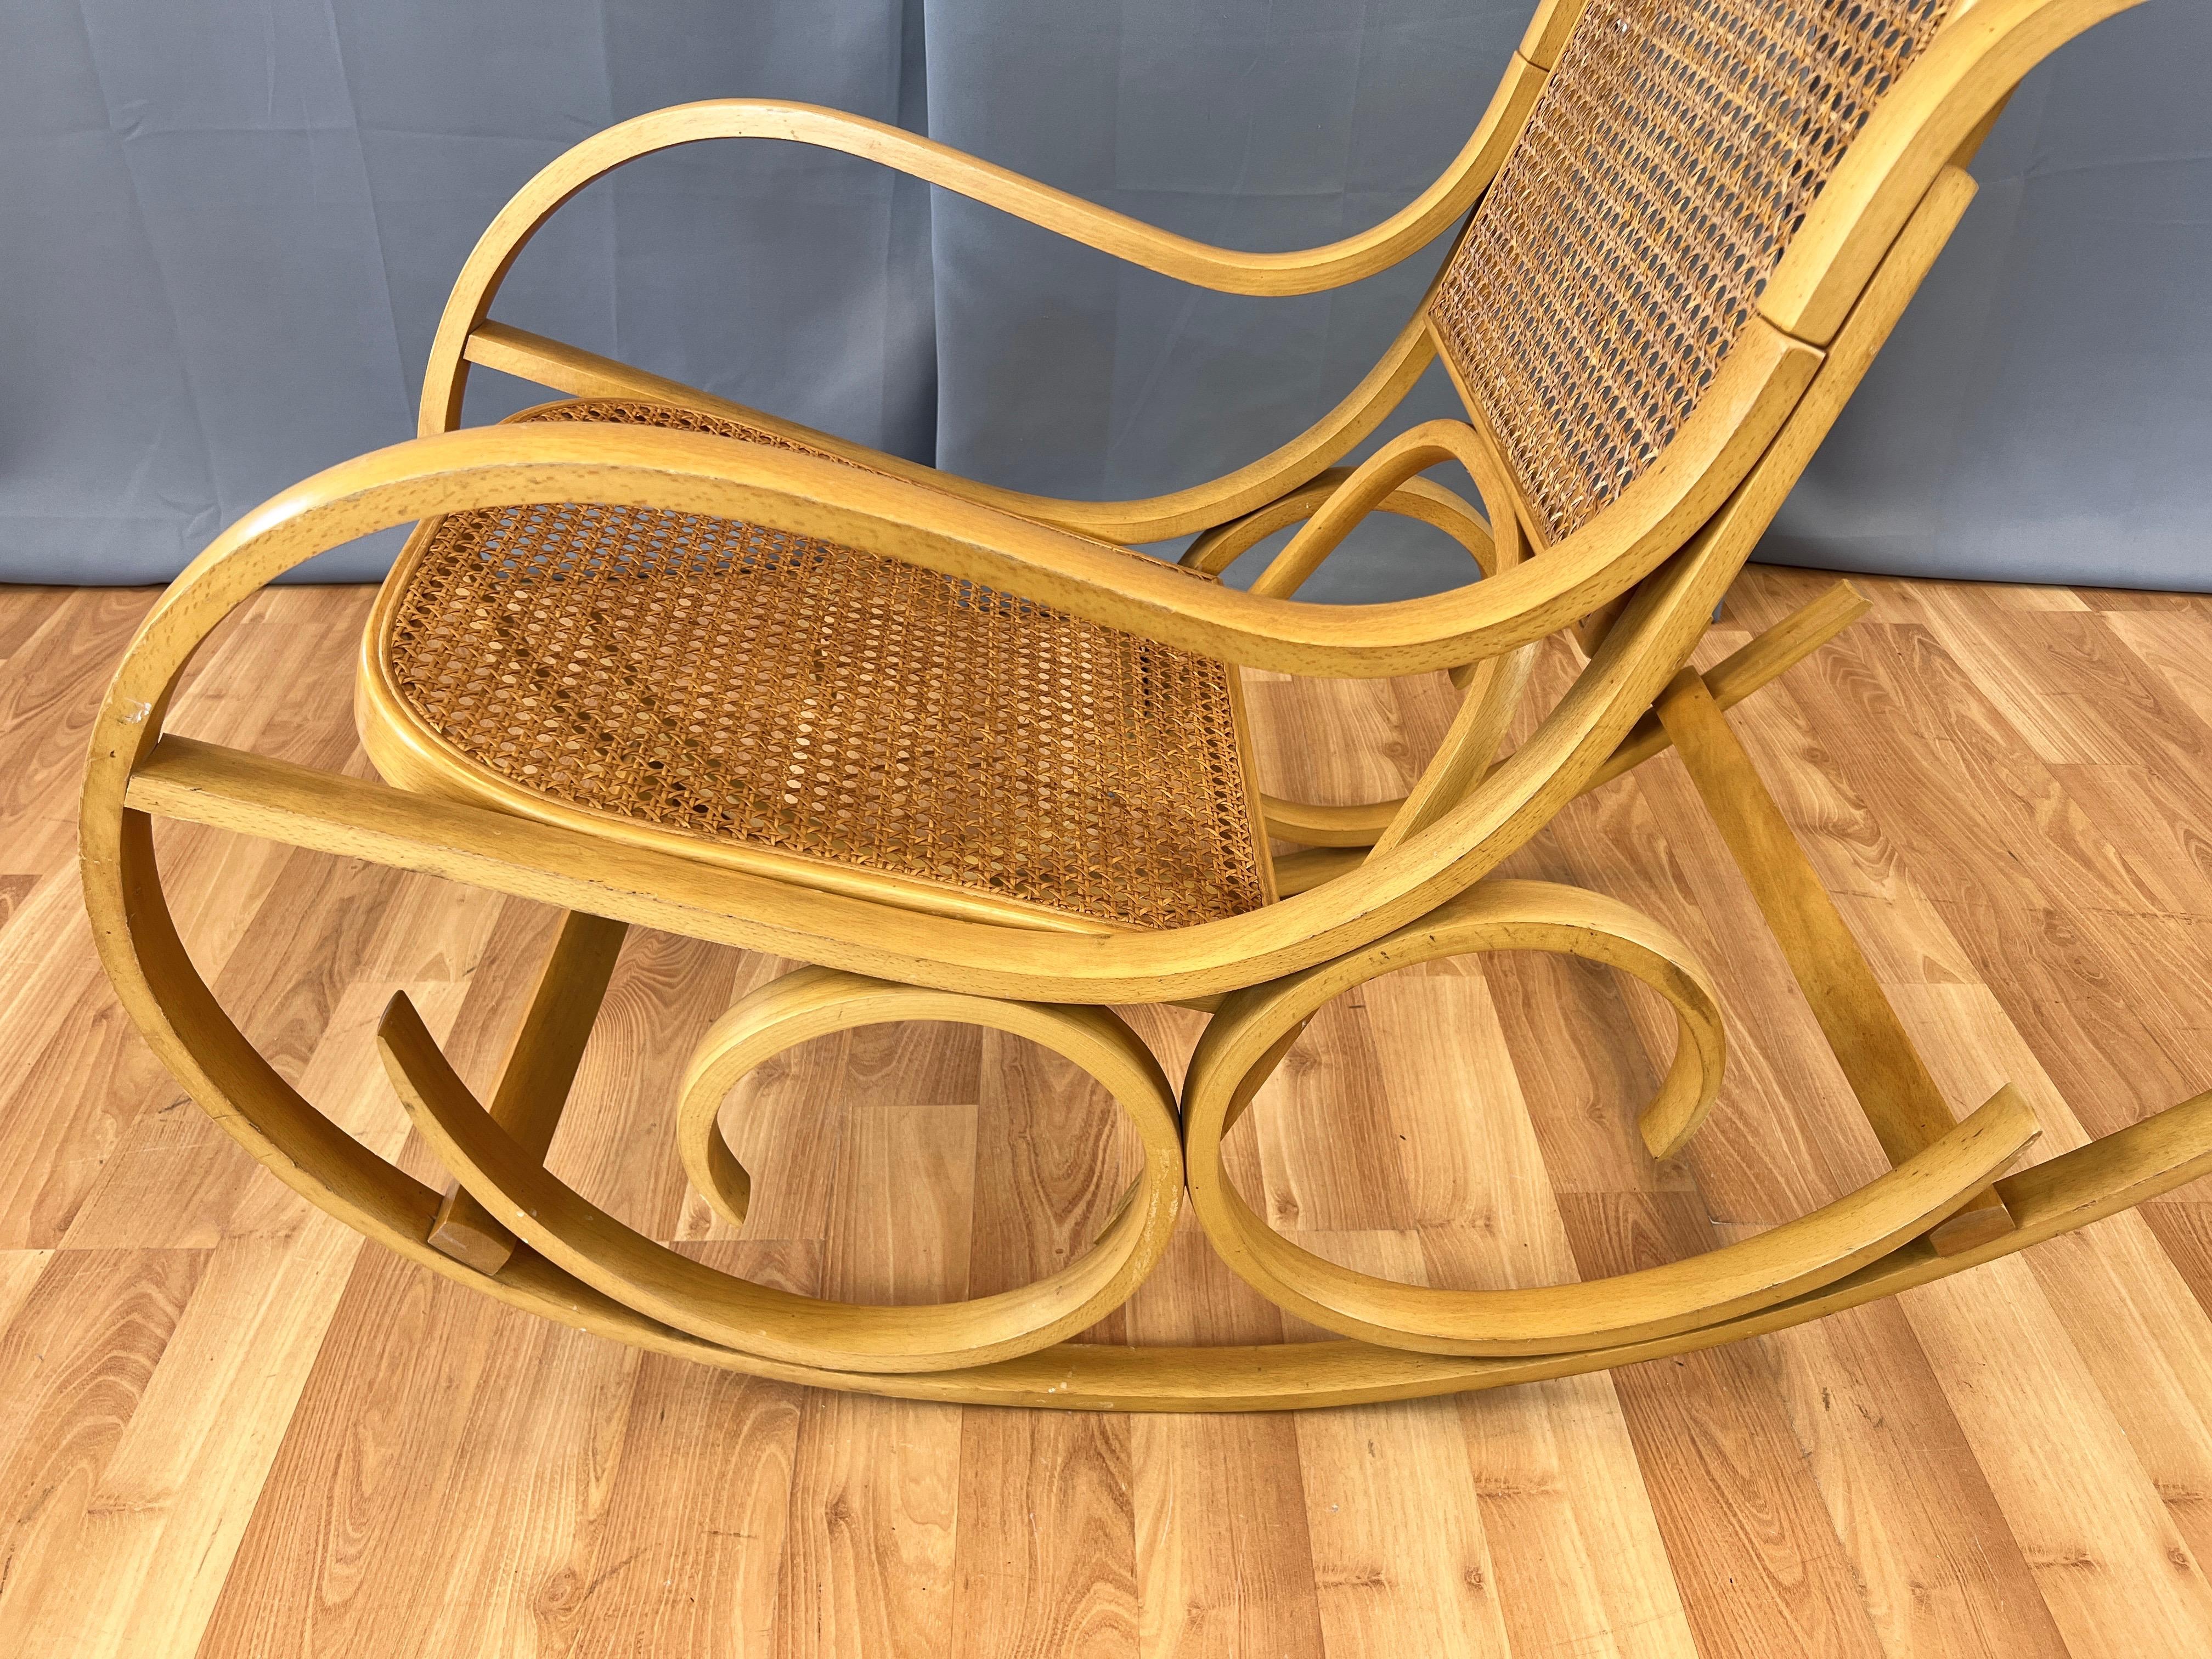 Luigi Crassevig Italian Bentwood Rocking Chair with Woven Cane Seat, 1970s For Sale 7